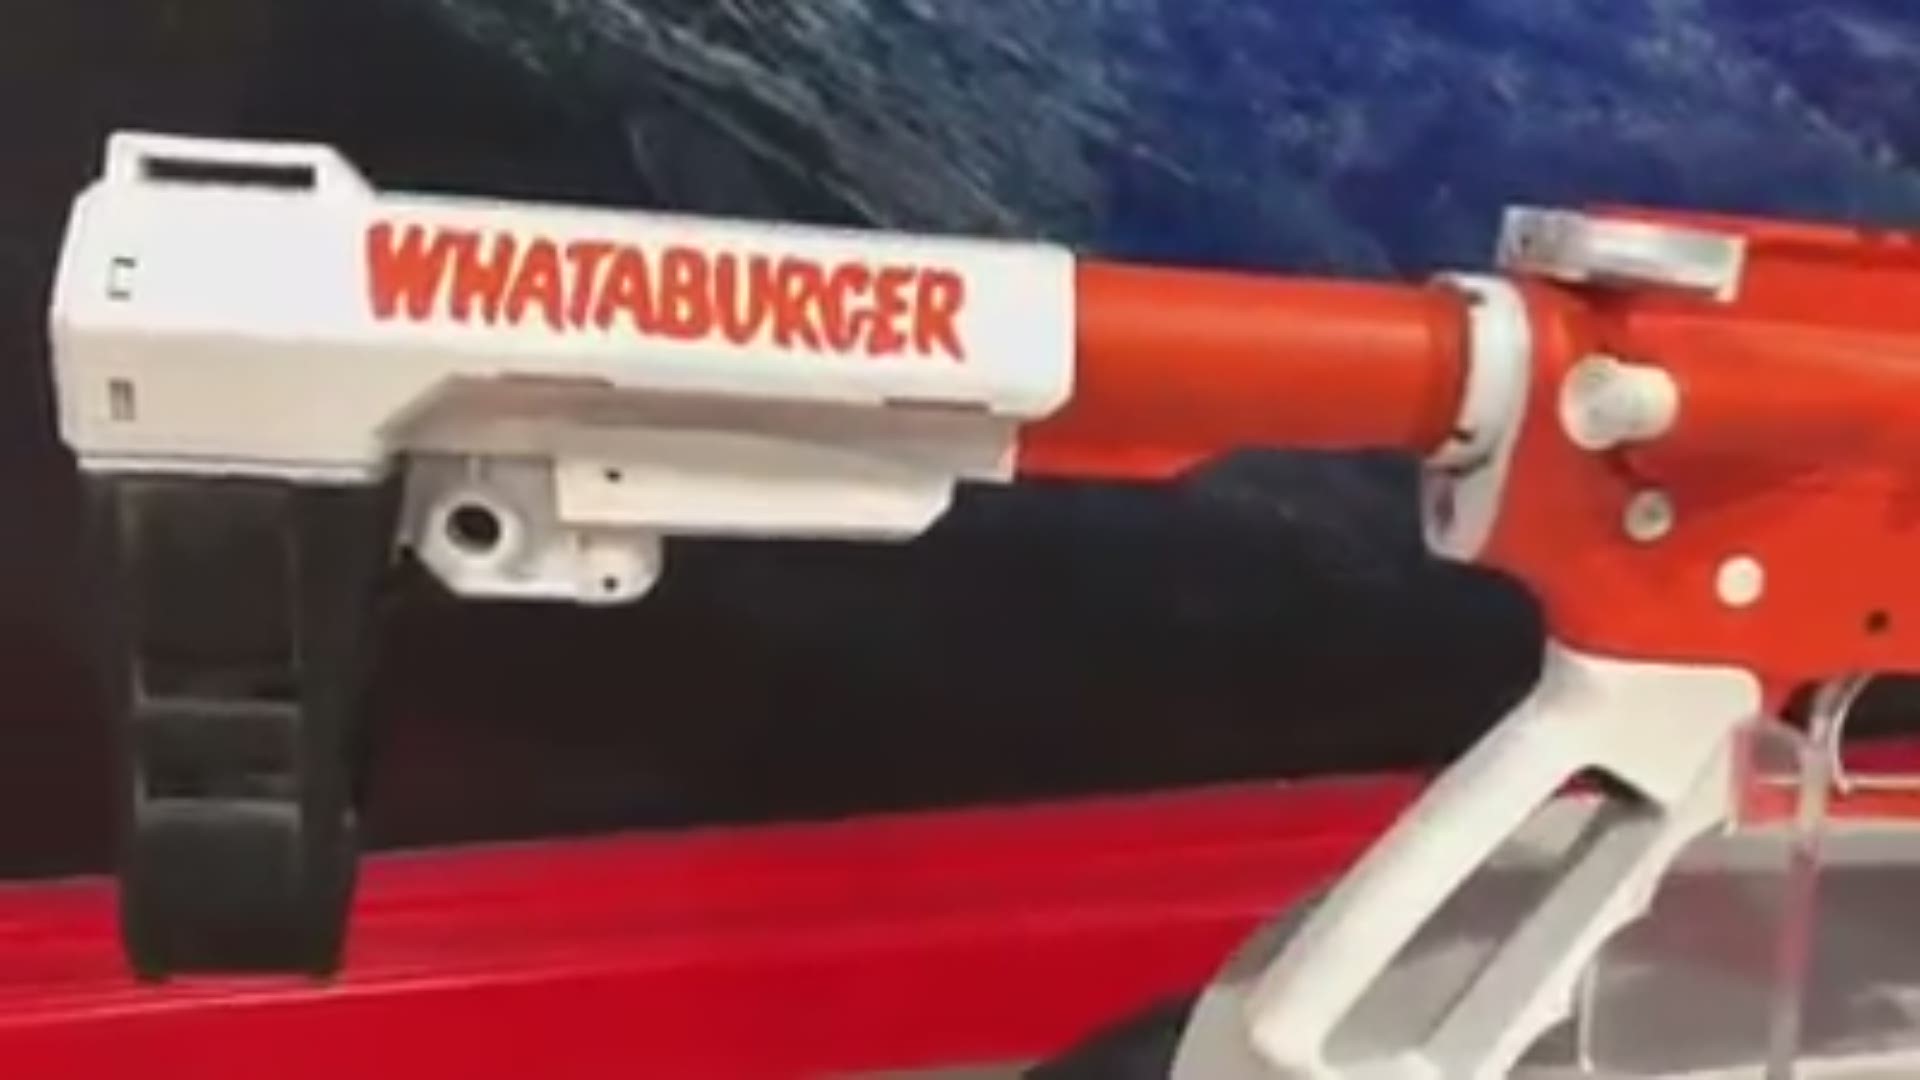 A customer at HTX Tactical likes Whataburger.  So he got this.